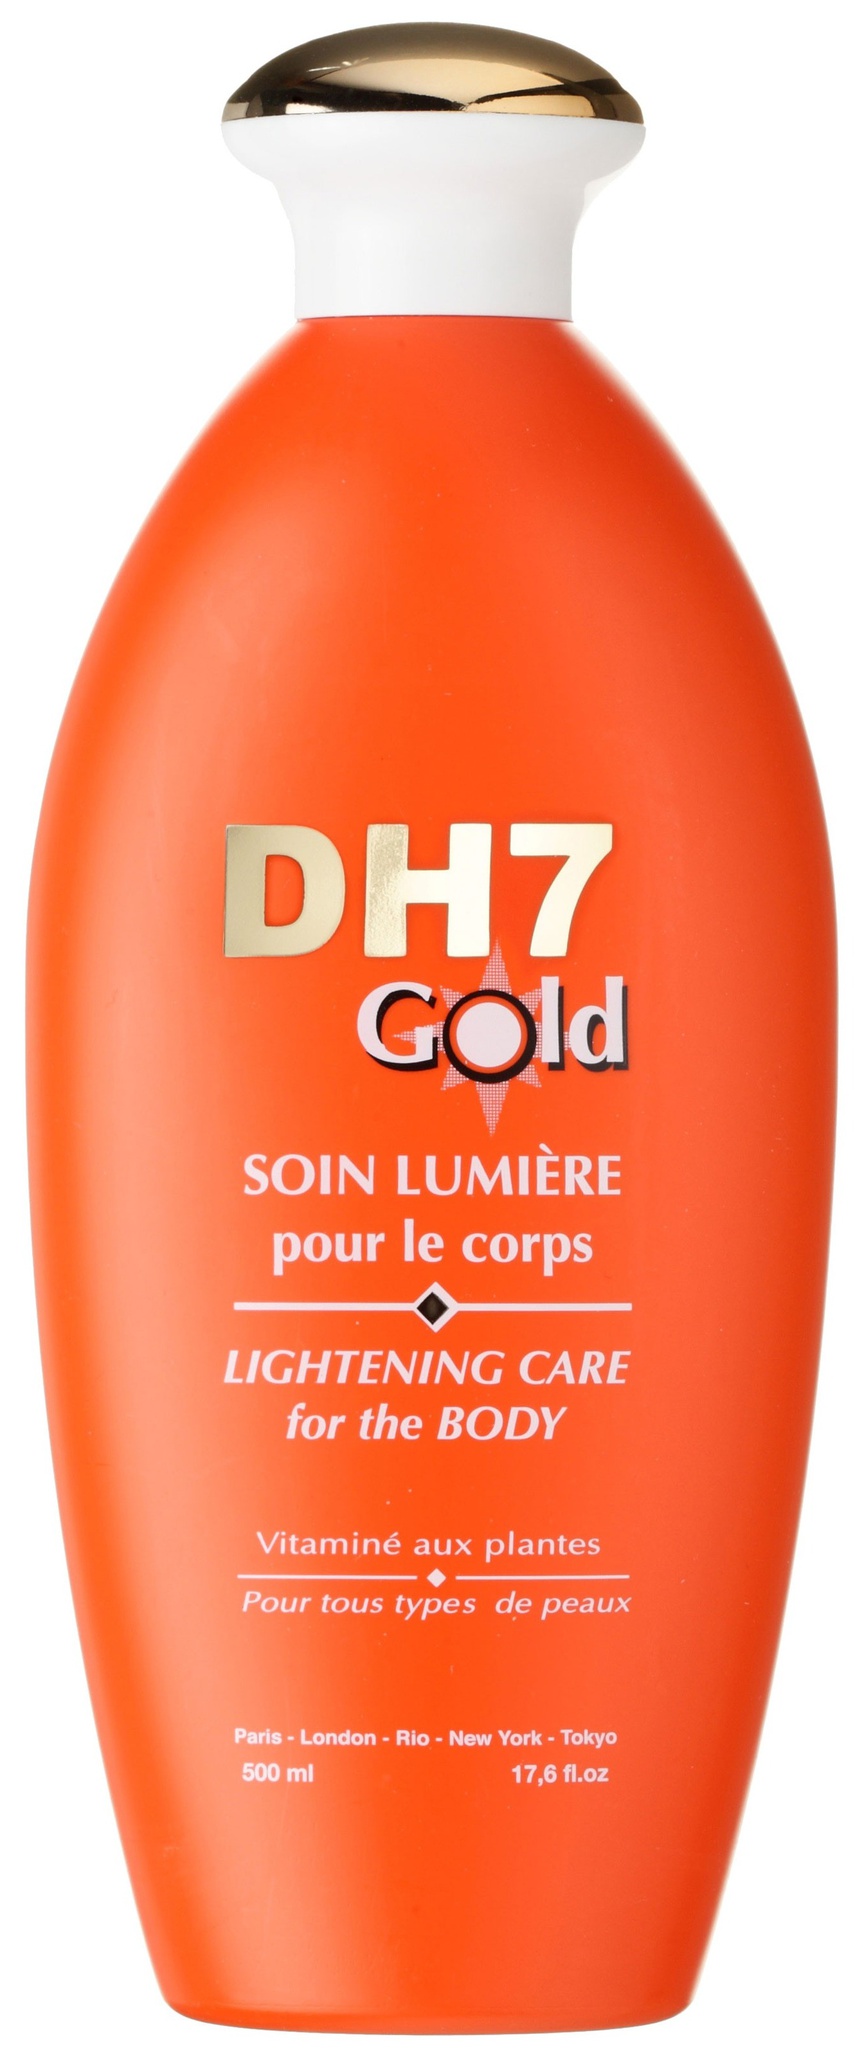 dh7 Gold